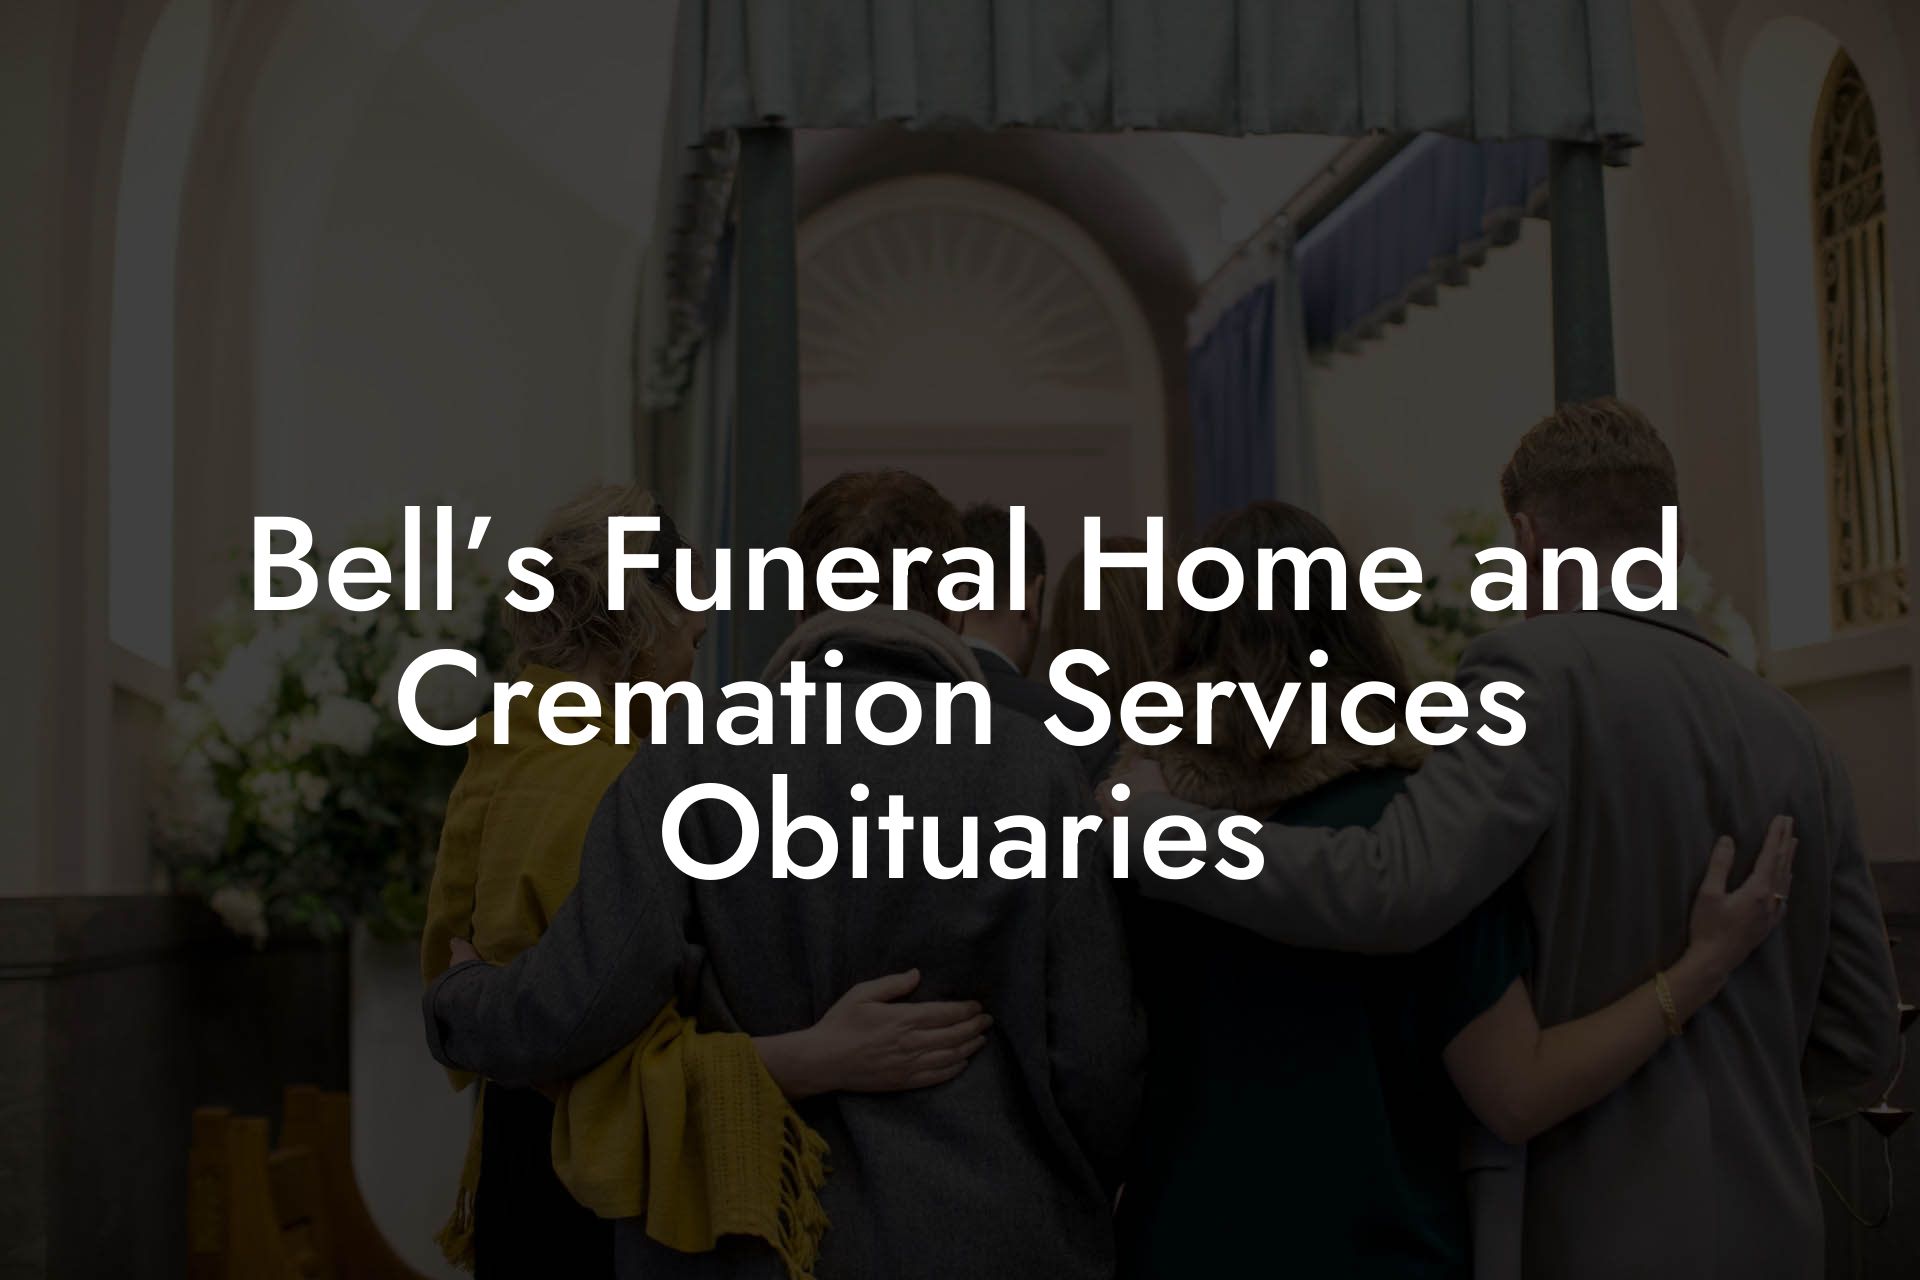 Bell’s Funeral Home and Cremation Services Obituaries